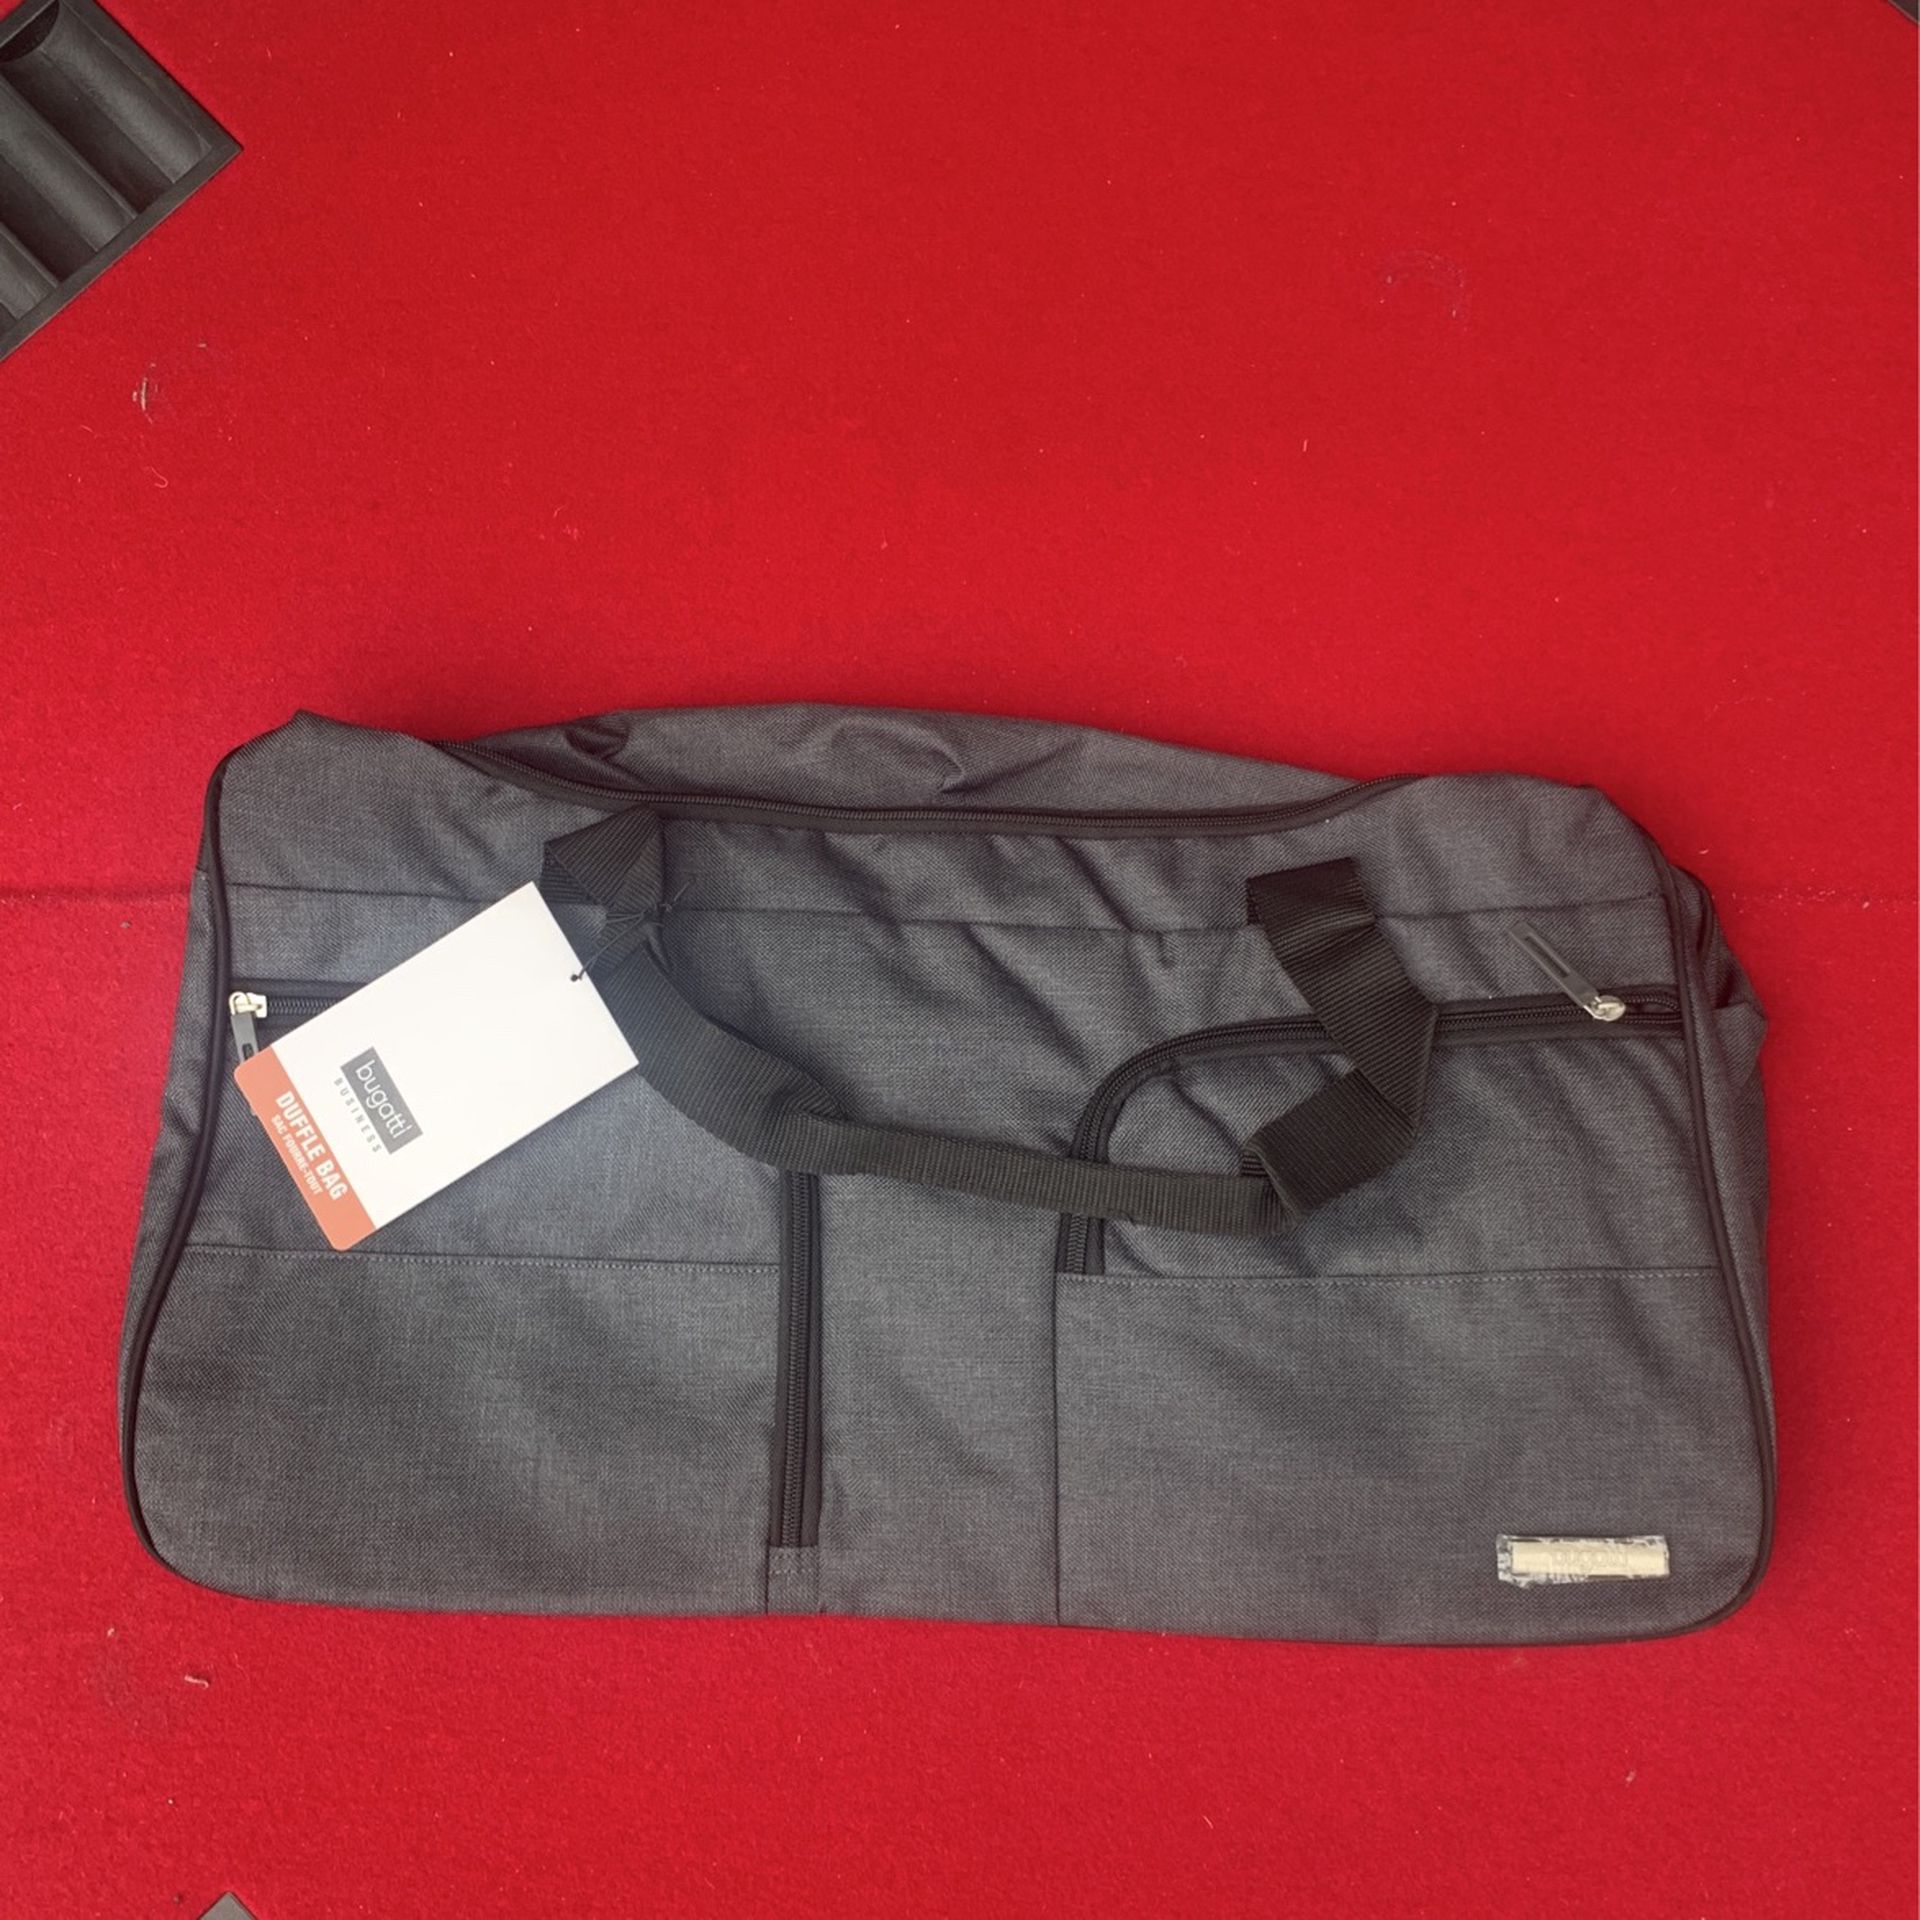 Bugatti Charcoal Brand New Duffle Bag W Strap Several Available